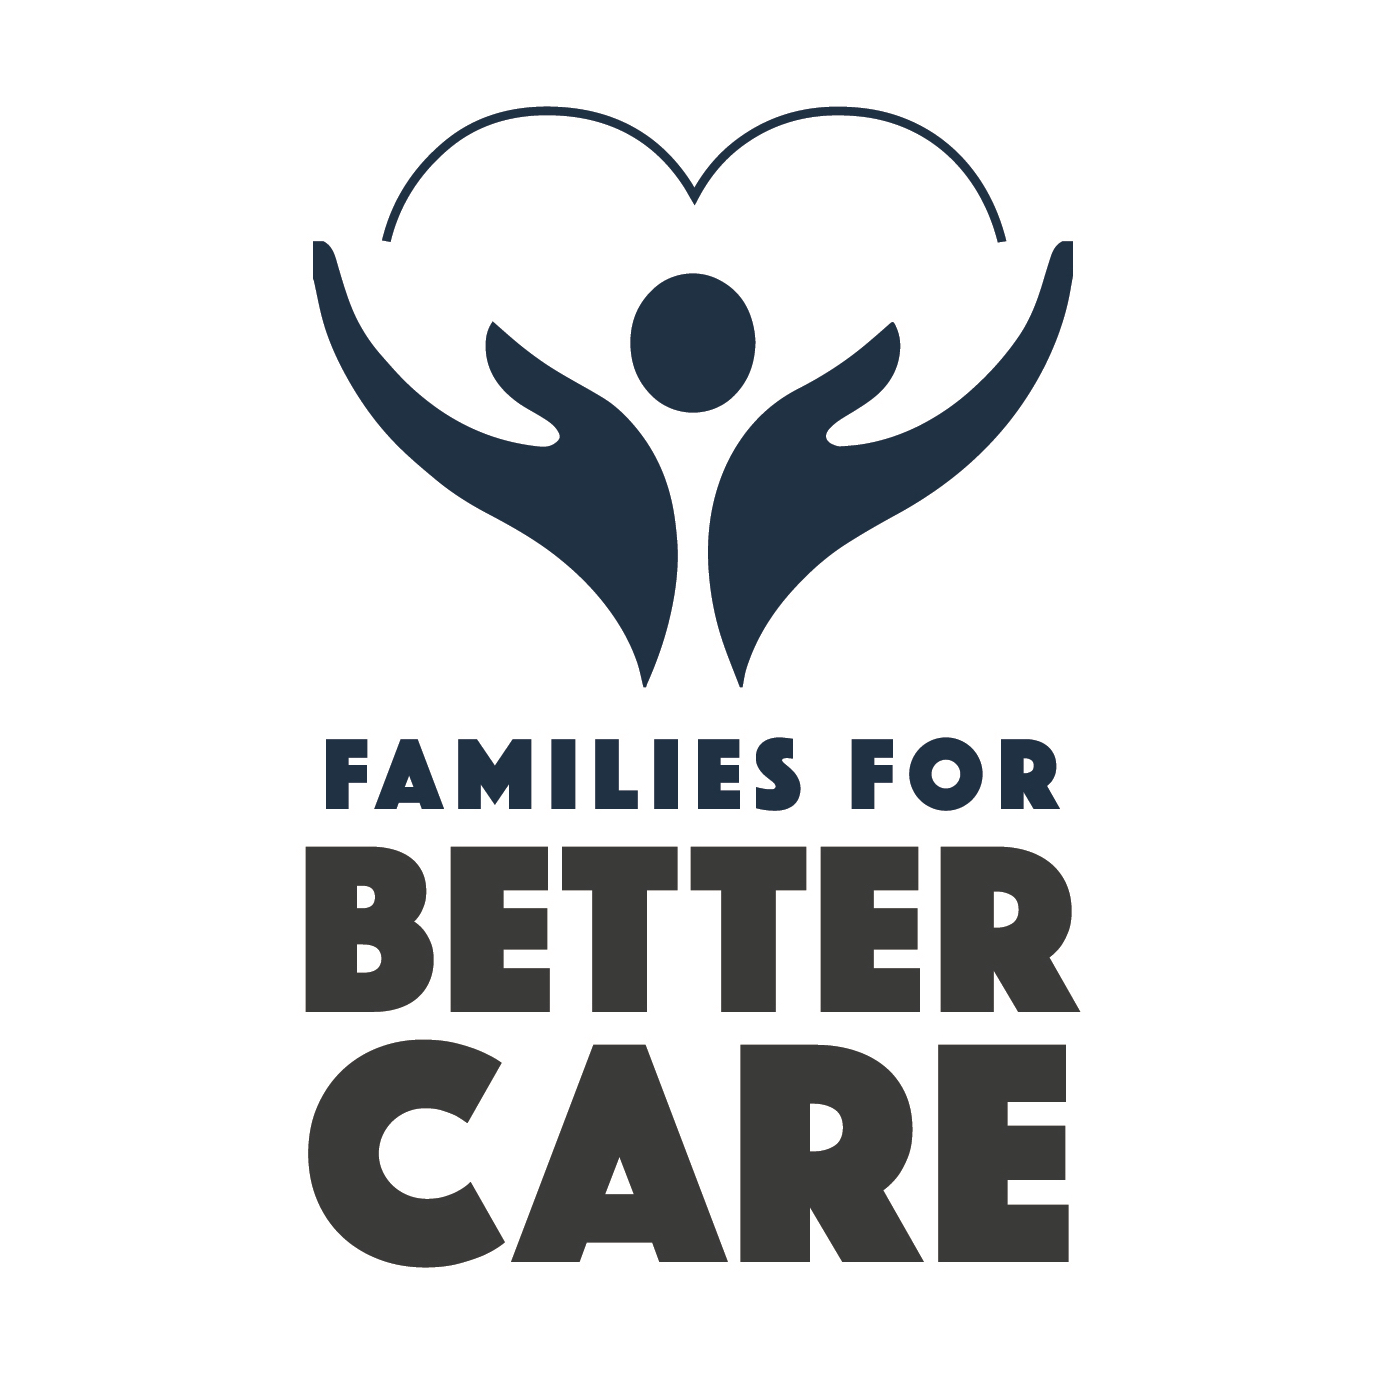 Families for Better Care Brian Lee Governor Abbott Texas nursing homes Image